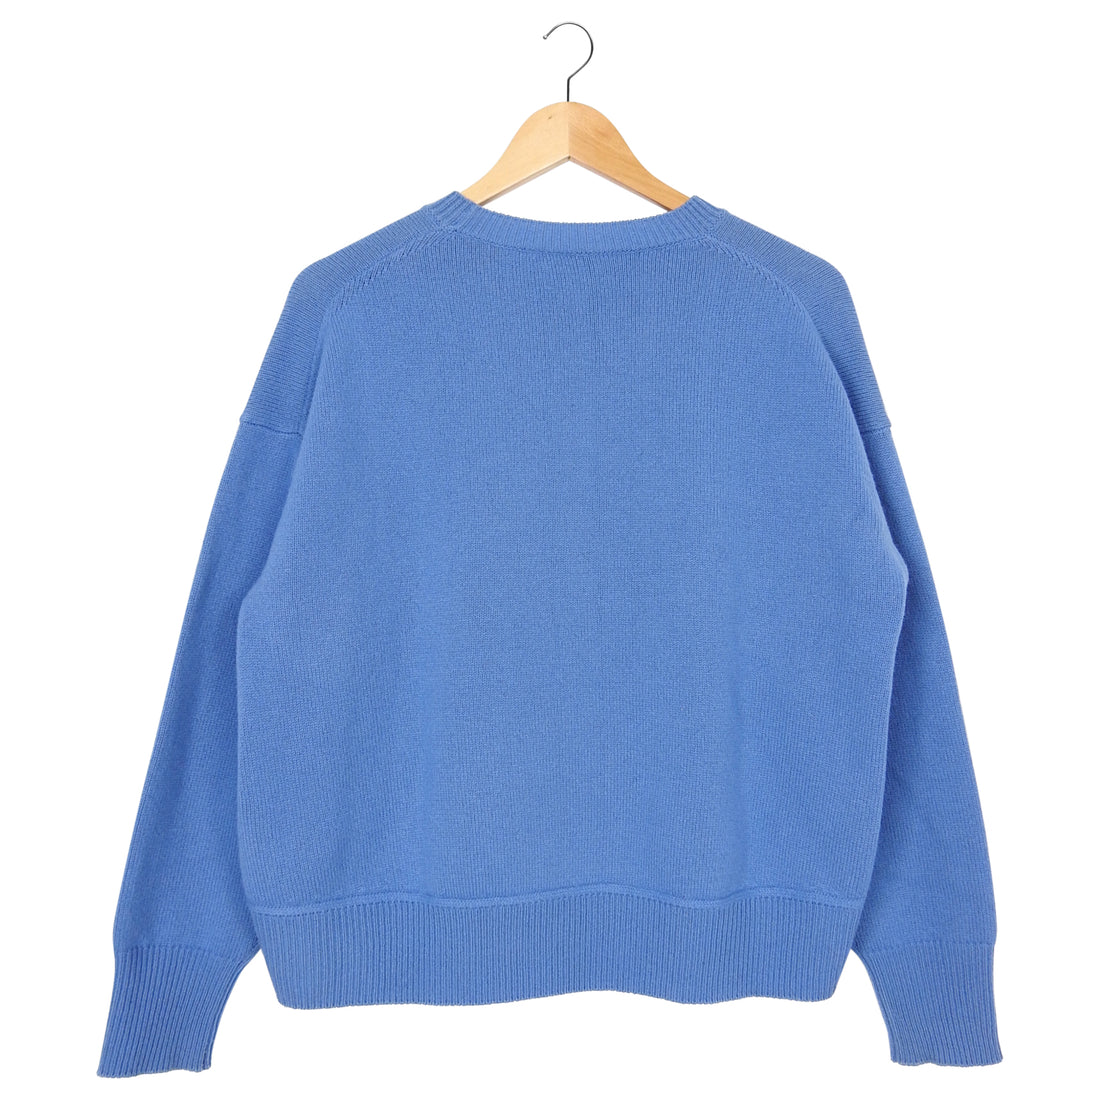 Moncler Blue Cashmere and Wool Logo Sweater - M